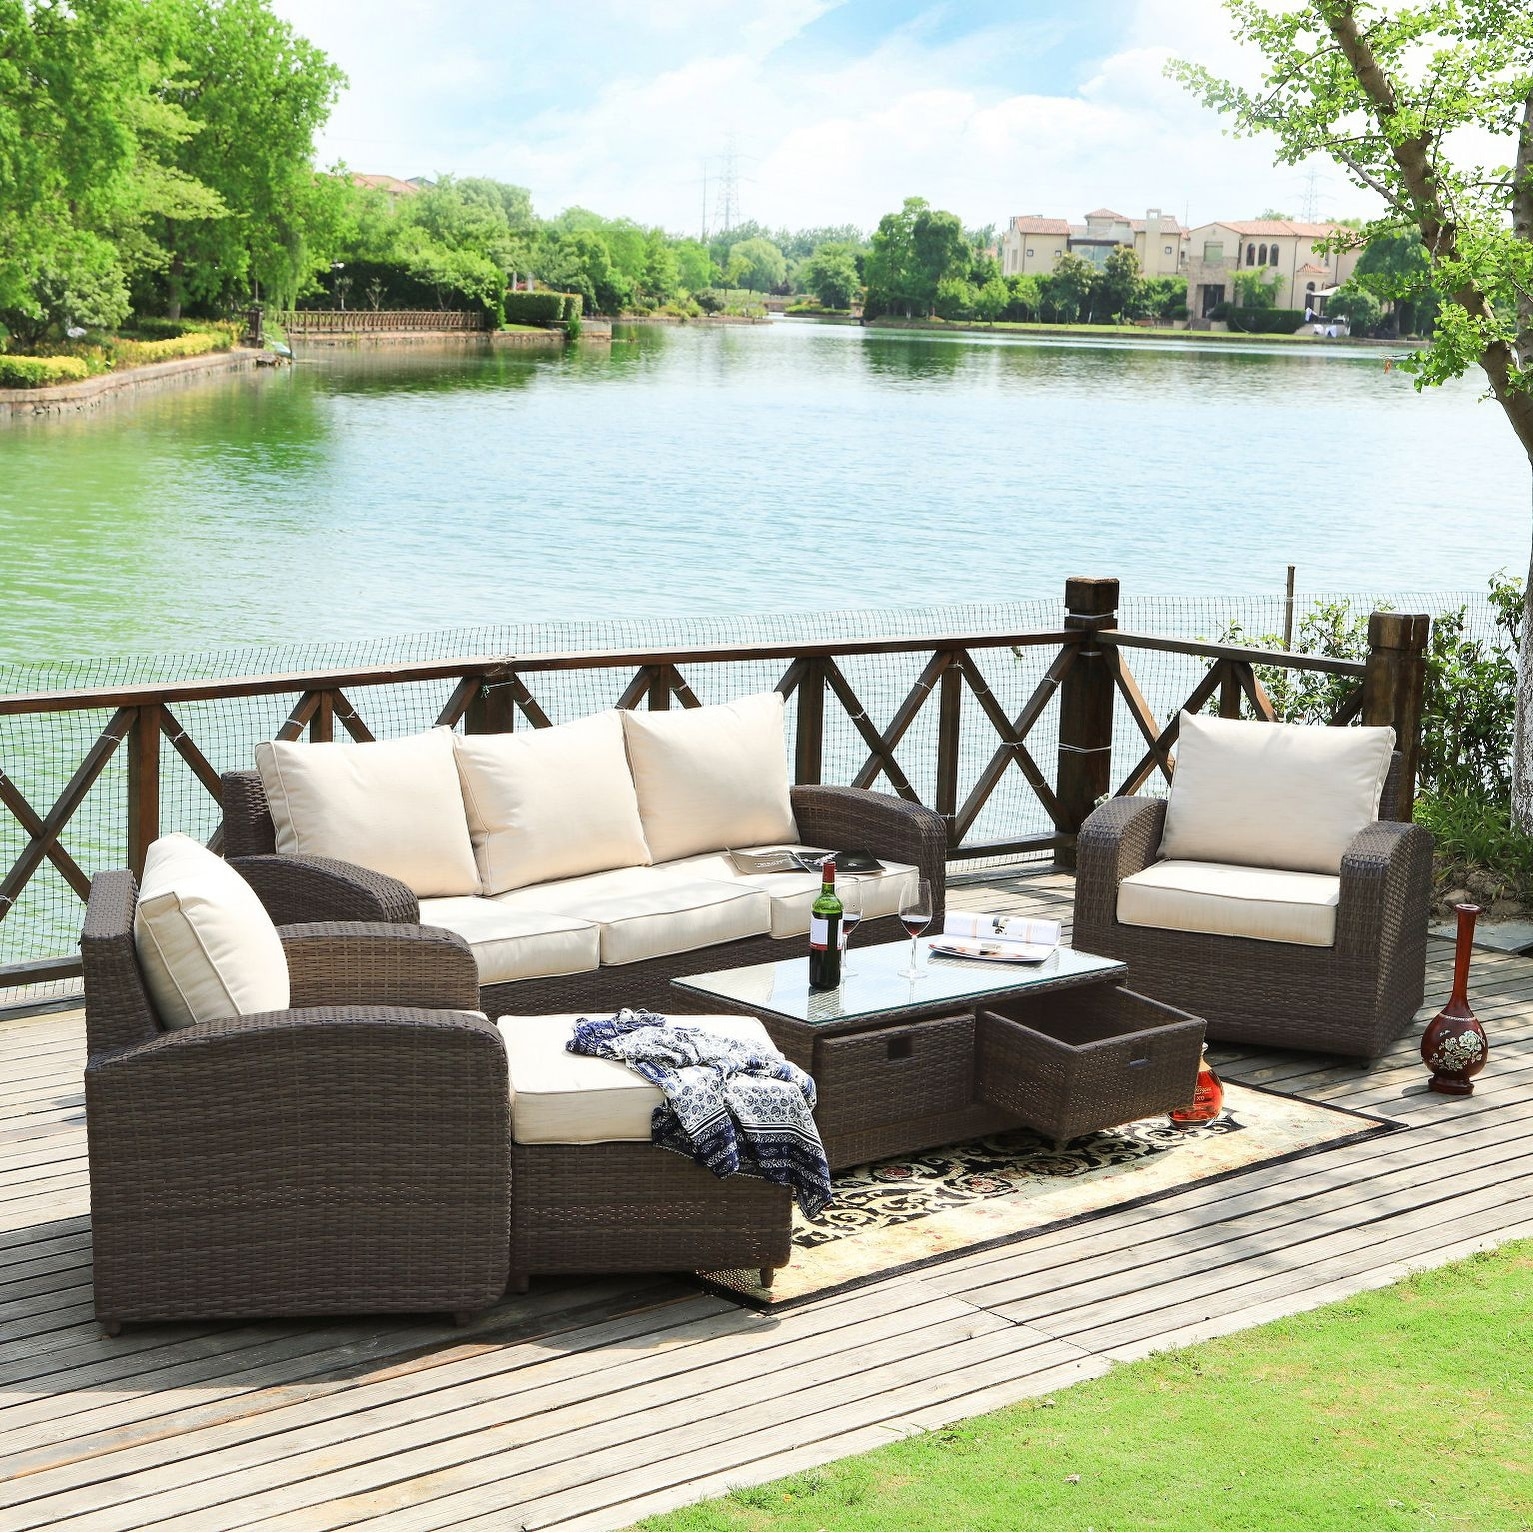 5-pieces Classical Handwoven Rattan Sofa Set With Storage Table